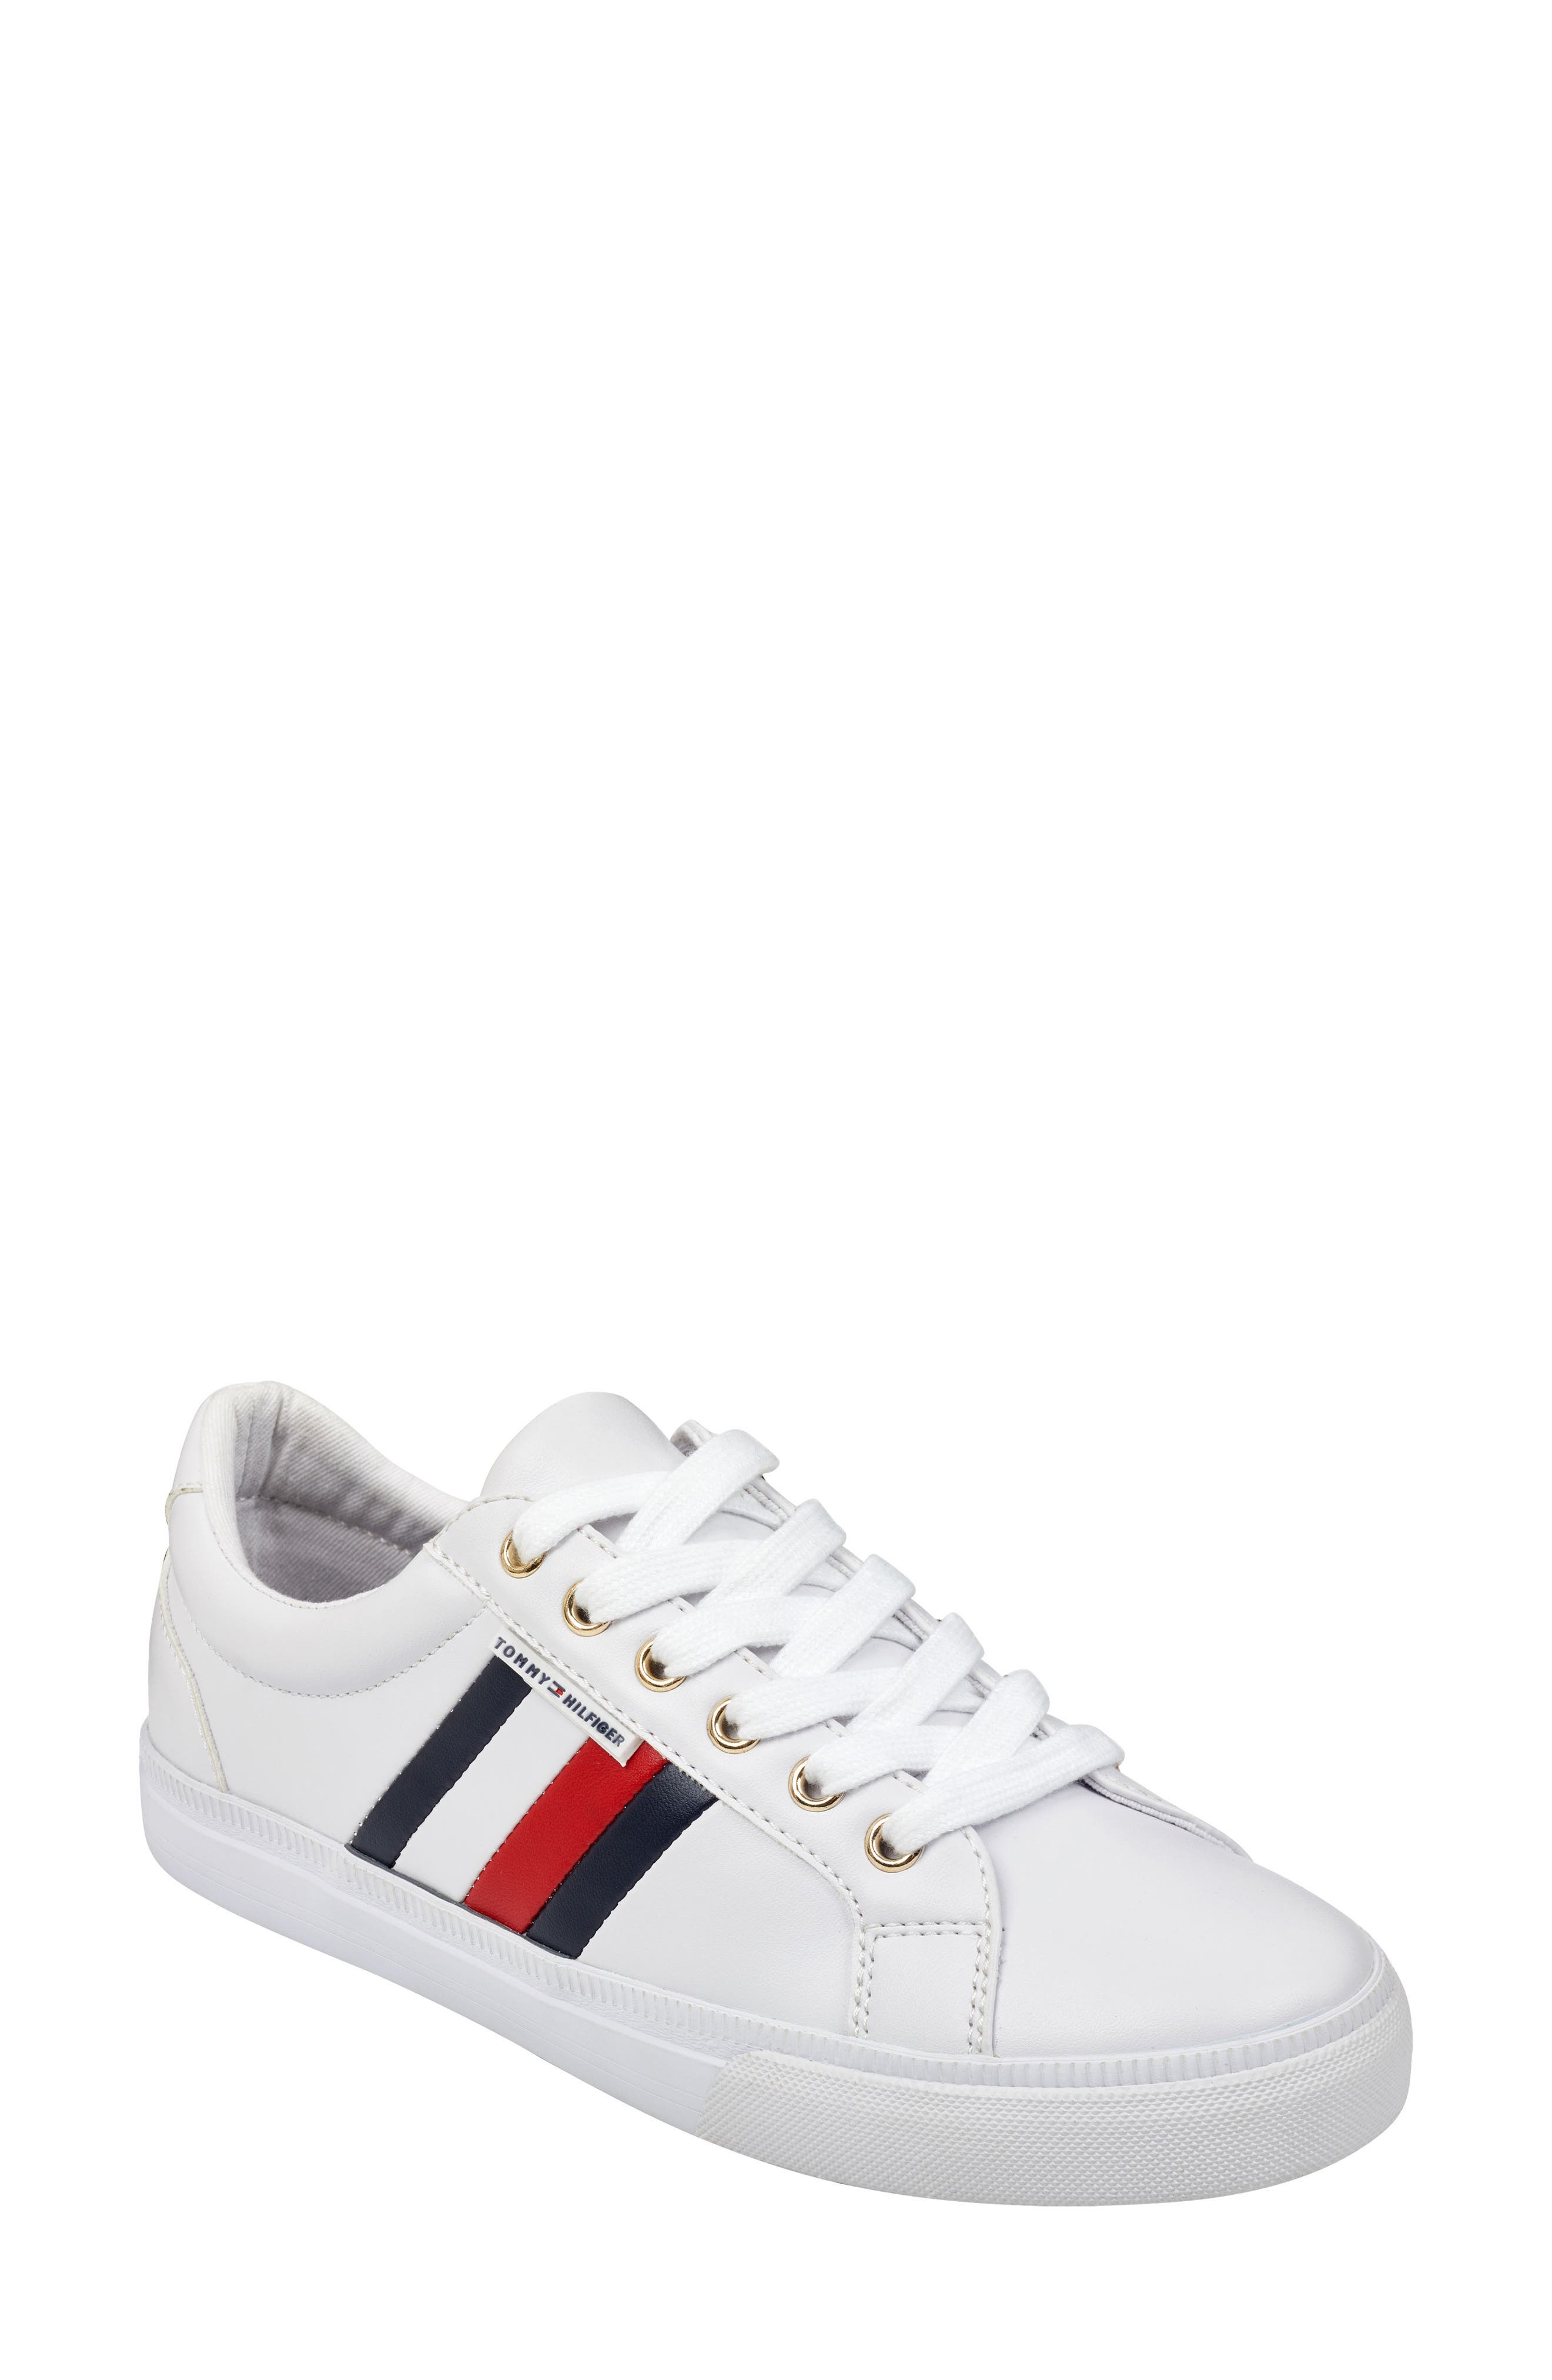 tommy shoes sale